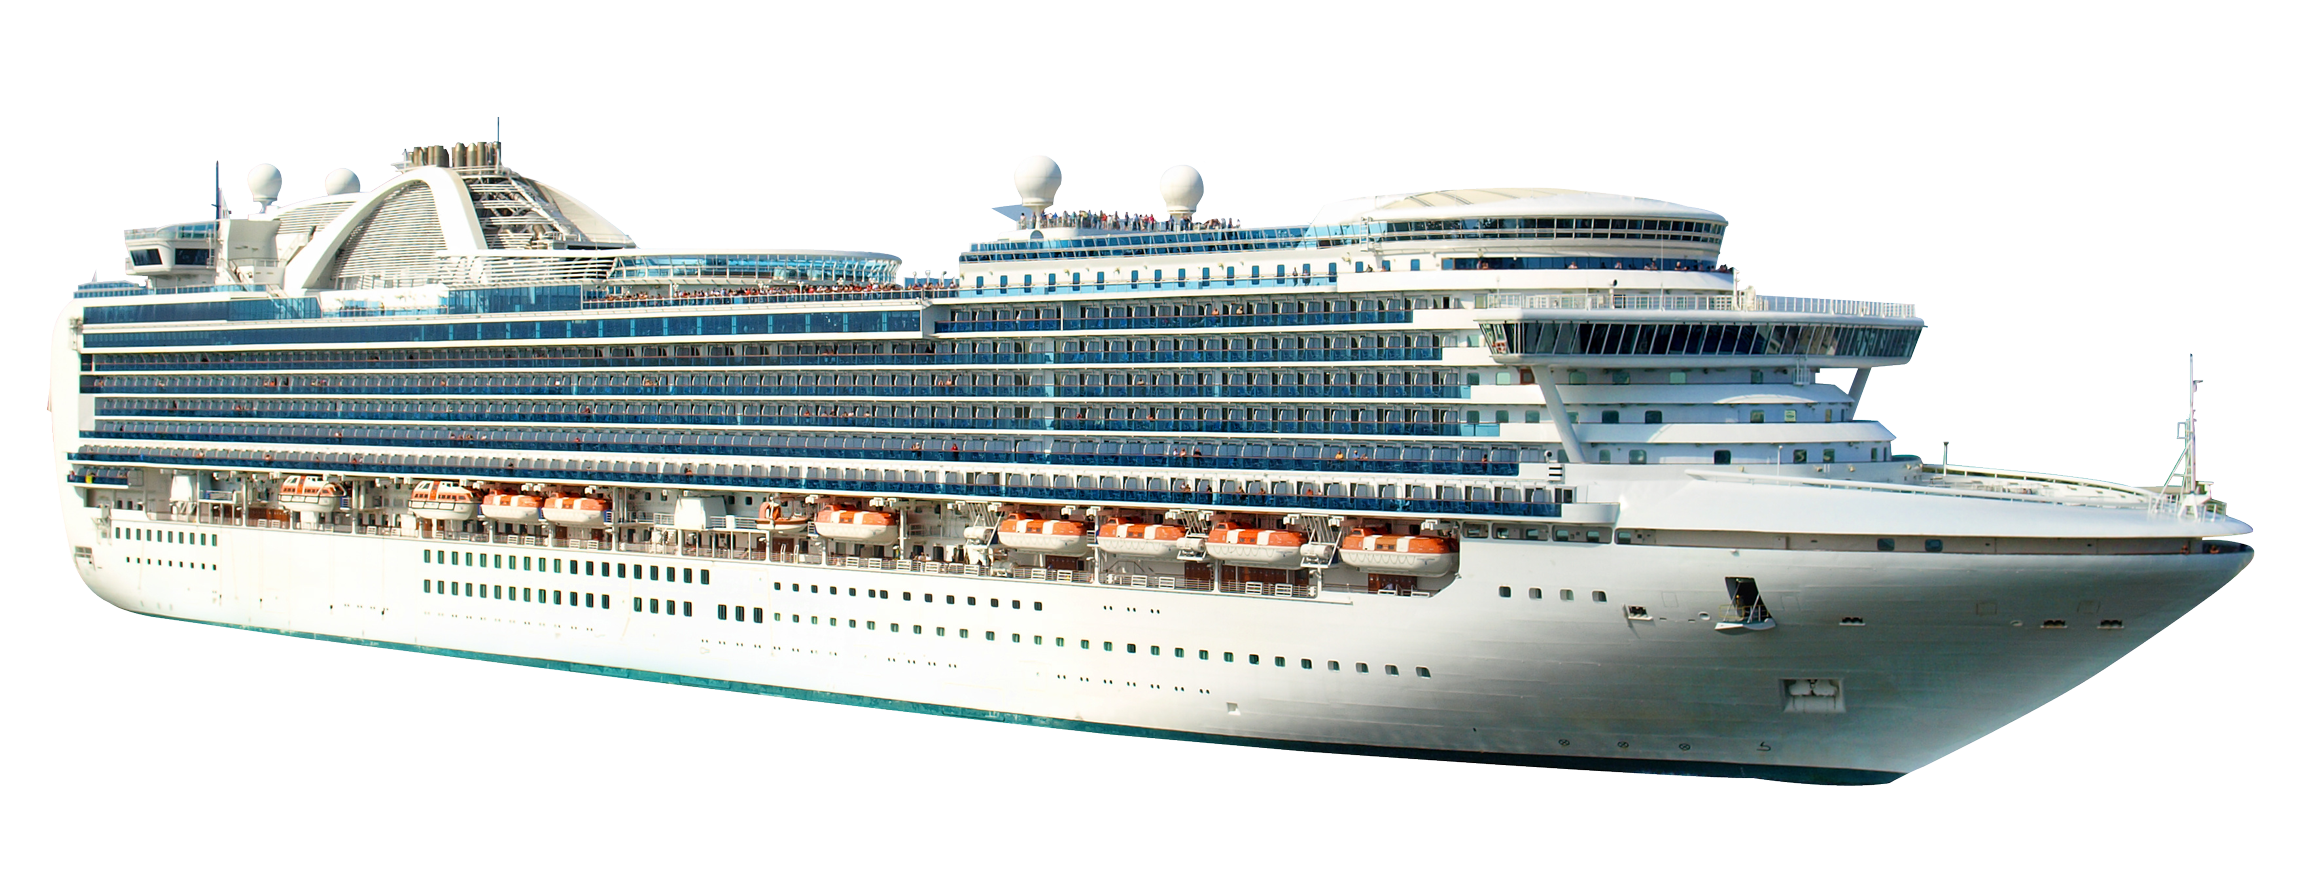 Cruise Ship PNG Free Download SVG Clip arts